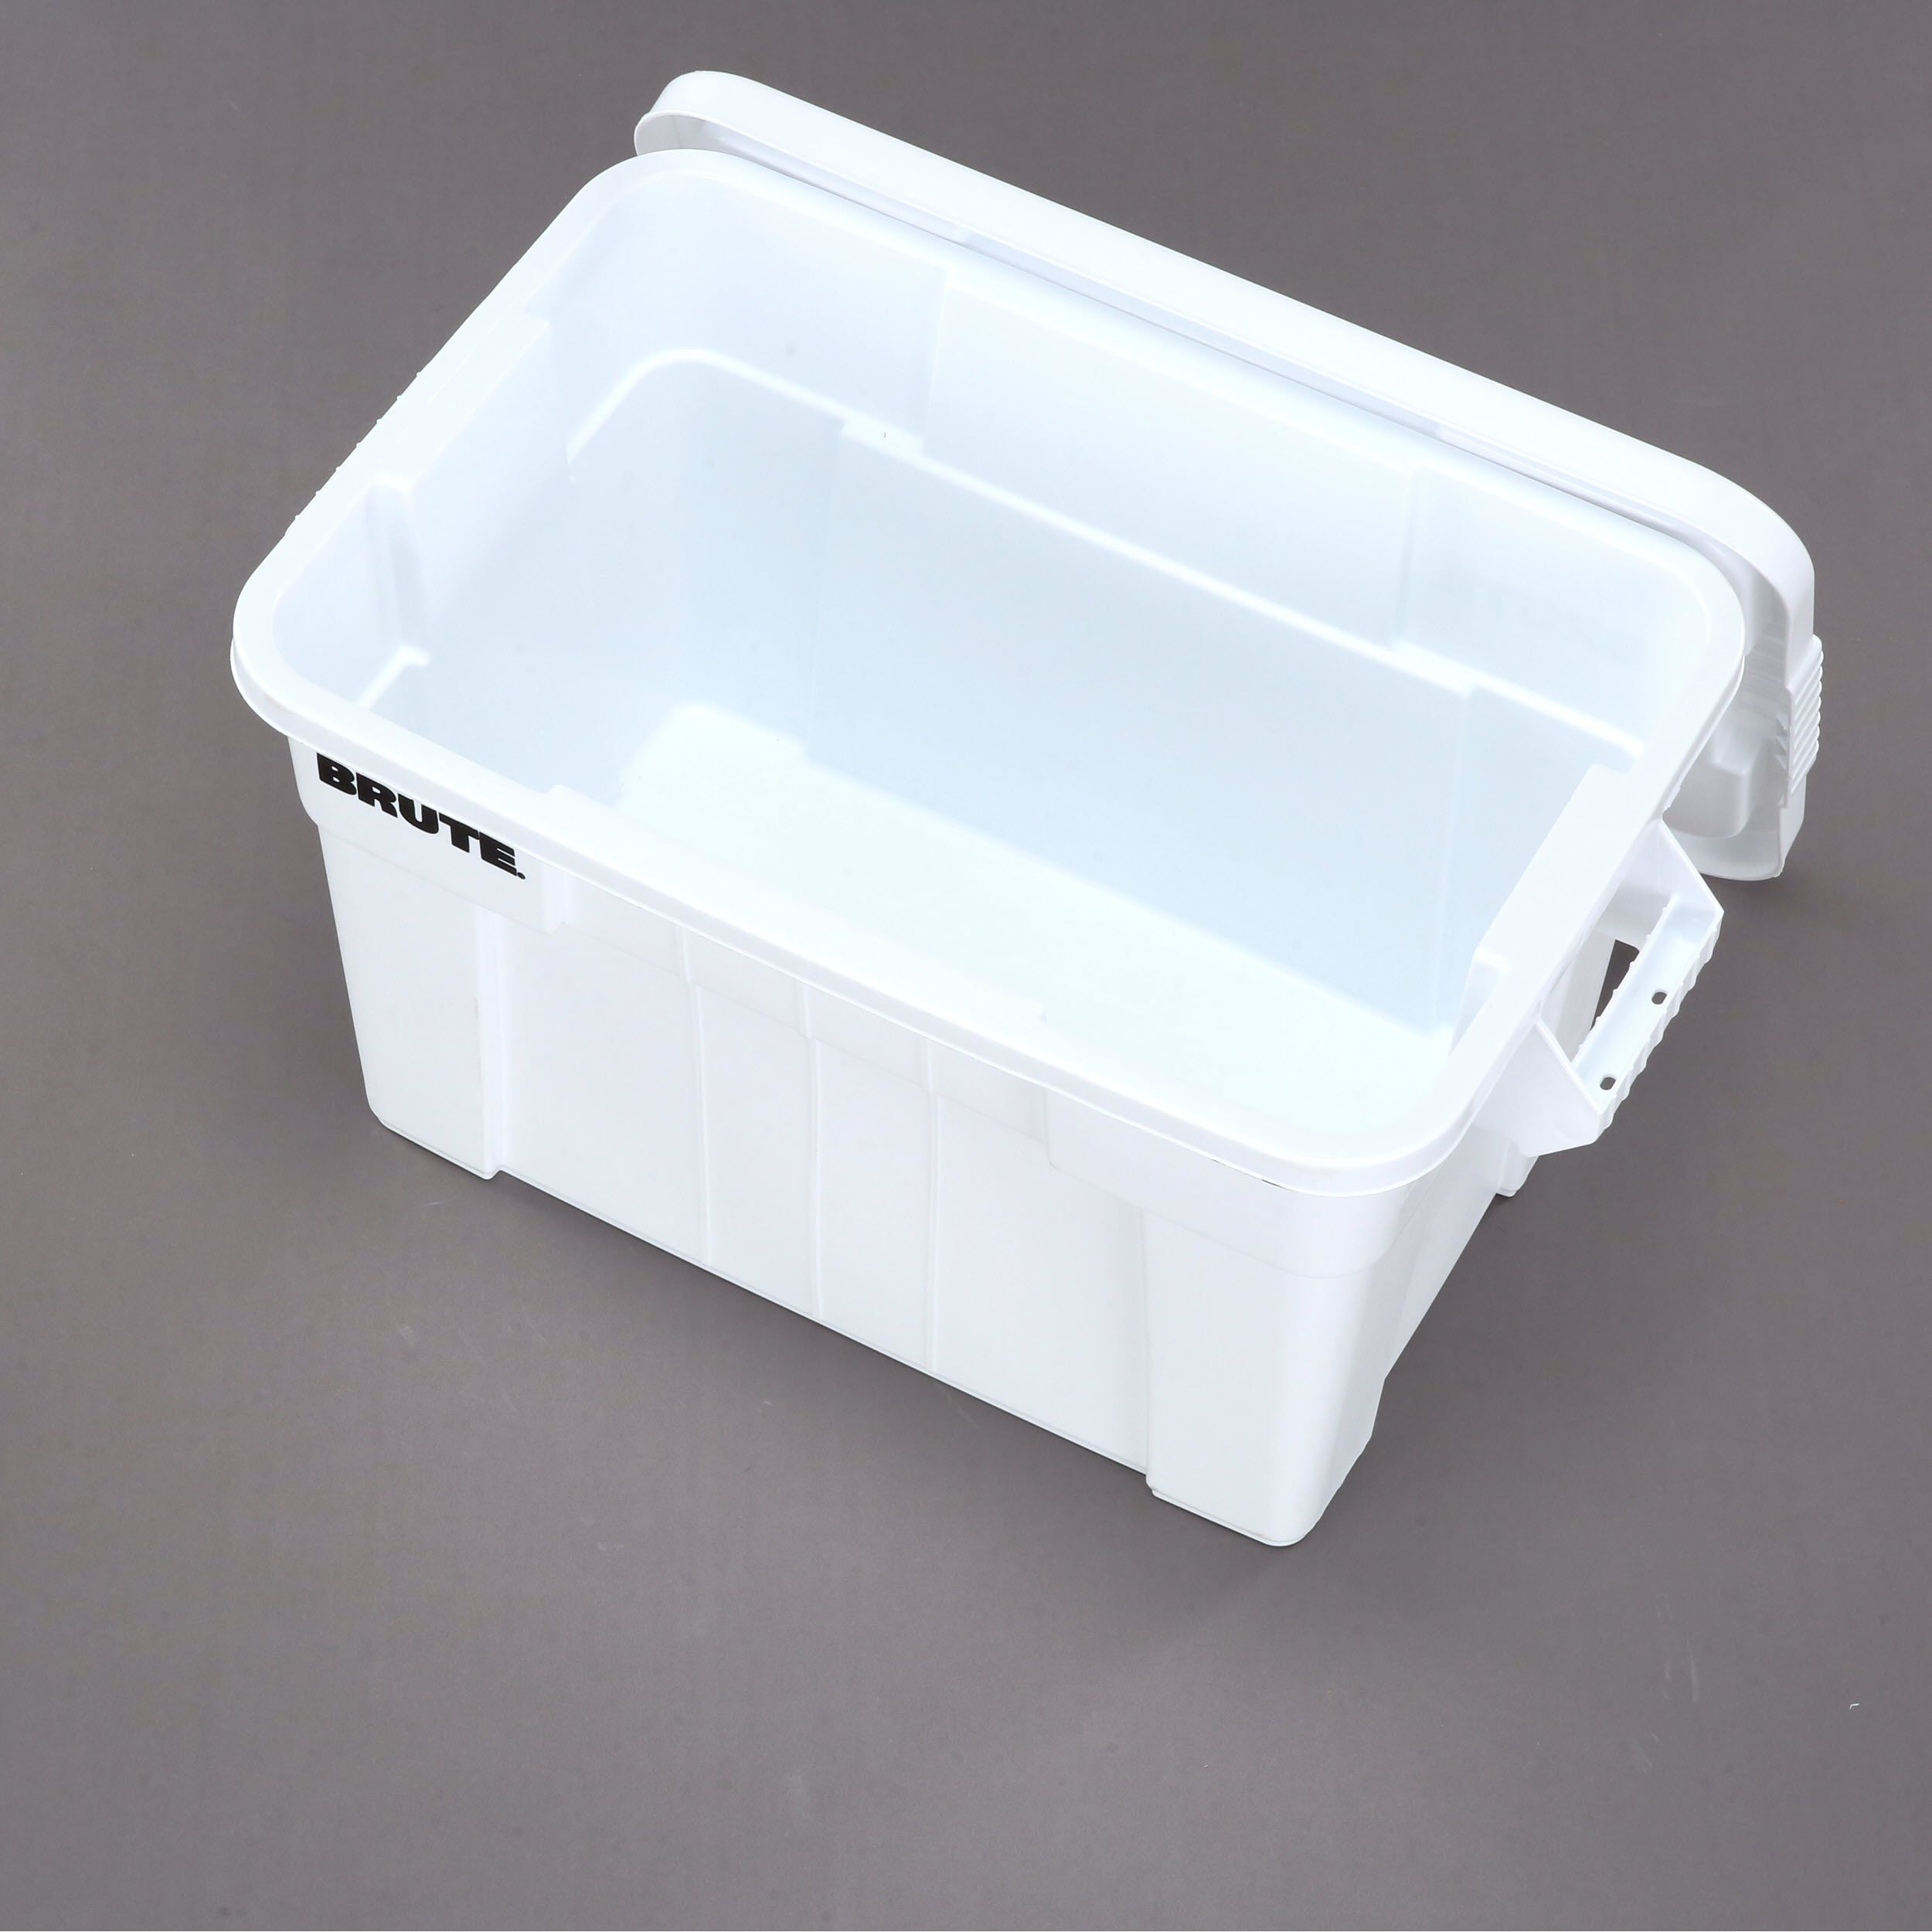 5 x 4400ml White Plastic Rectangular Tamper Proof Tubs with Lids & Handles 